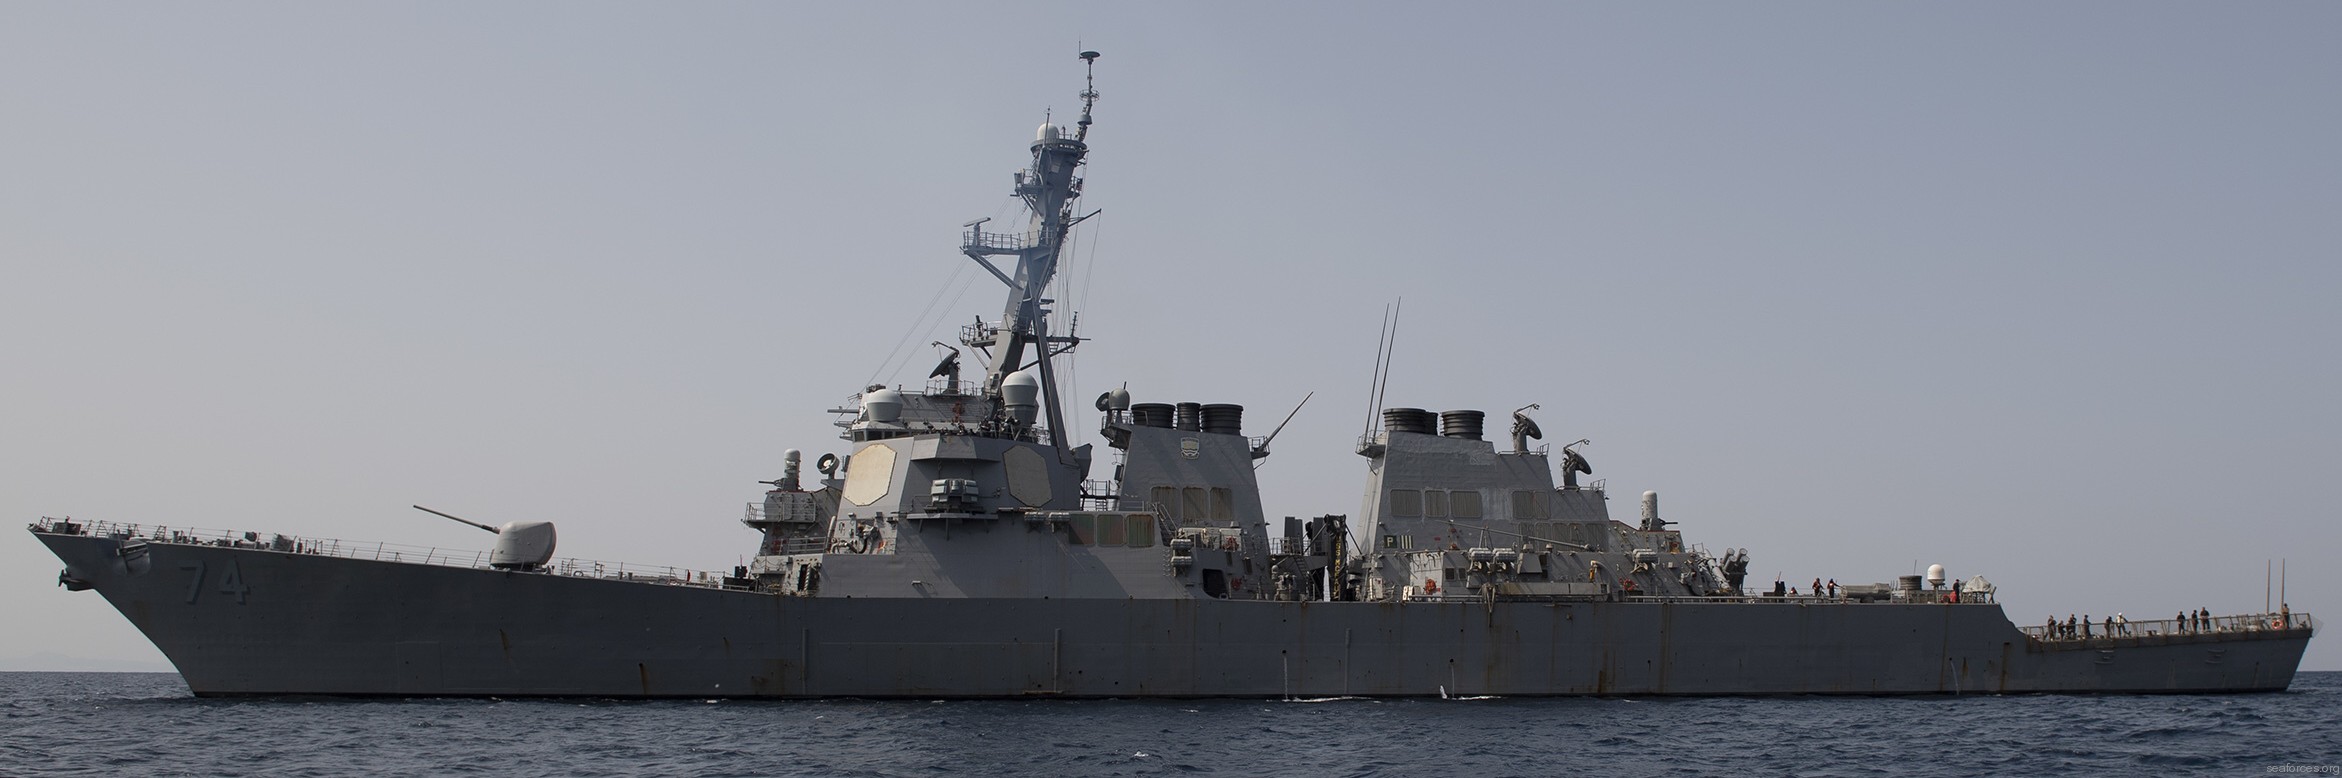 ddg-74 uss mcfaul guided missile destroyer arleigh burke class aegis bmd 16